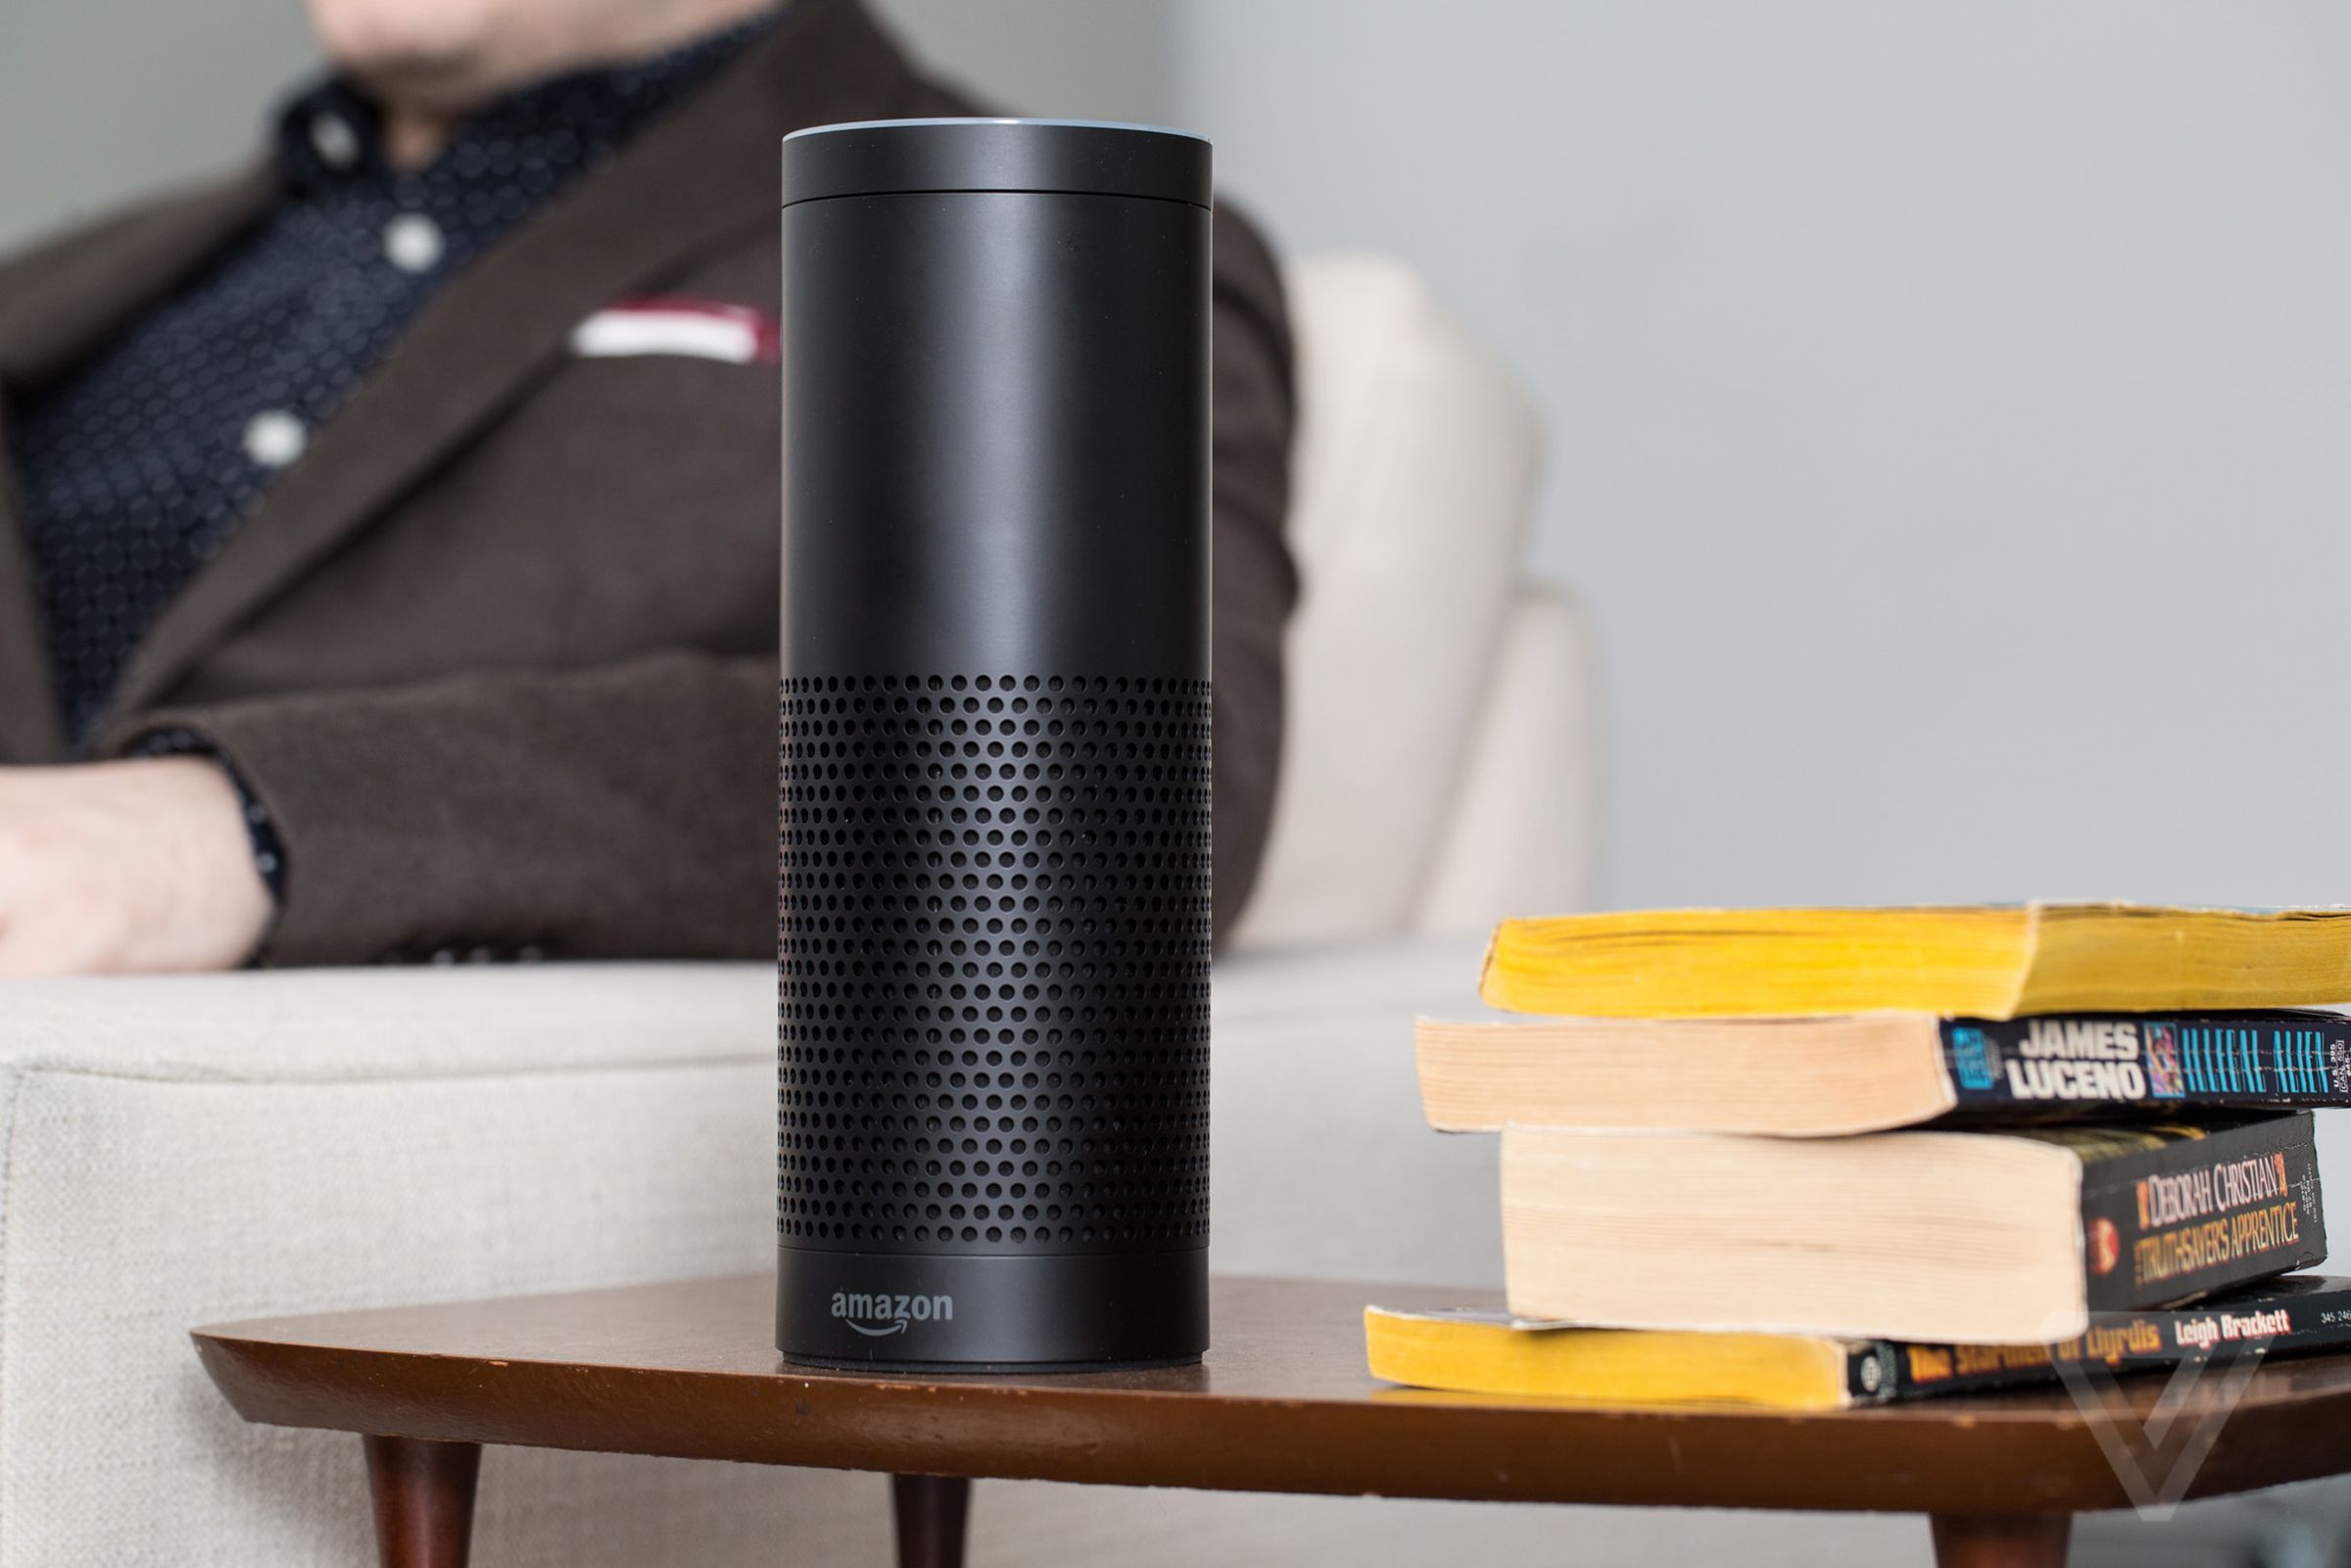 A 1st-gen Amazon Echo on a table besides a couch.